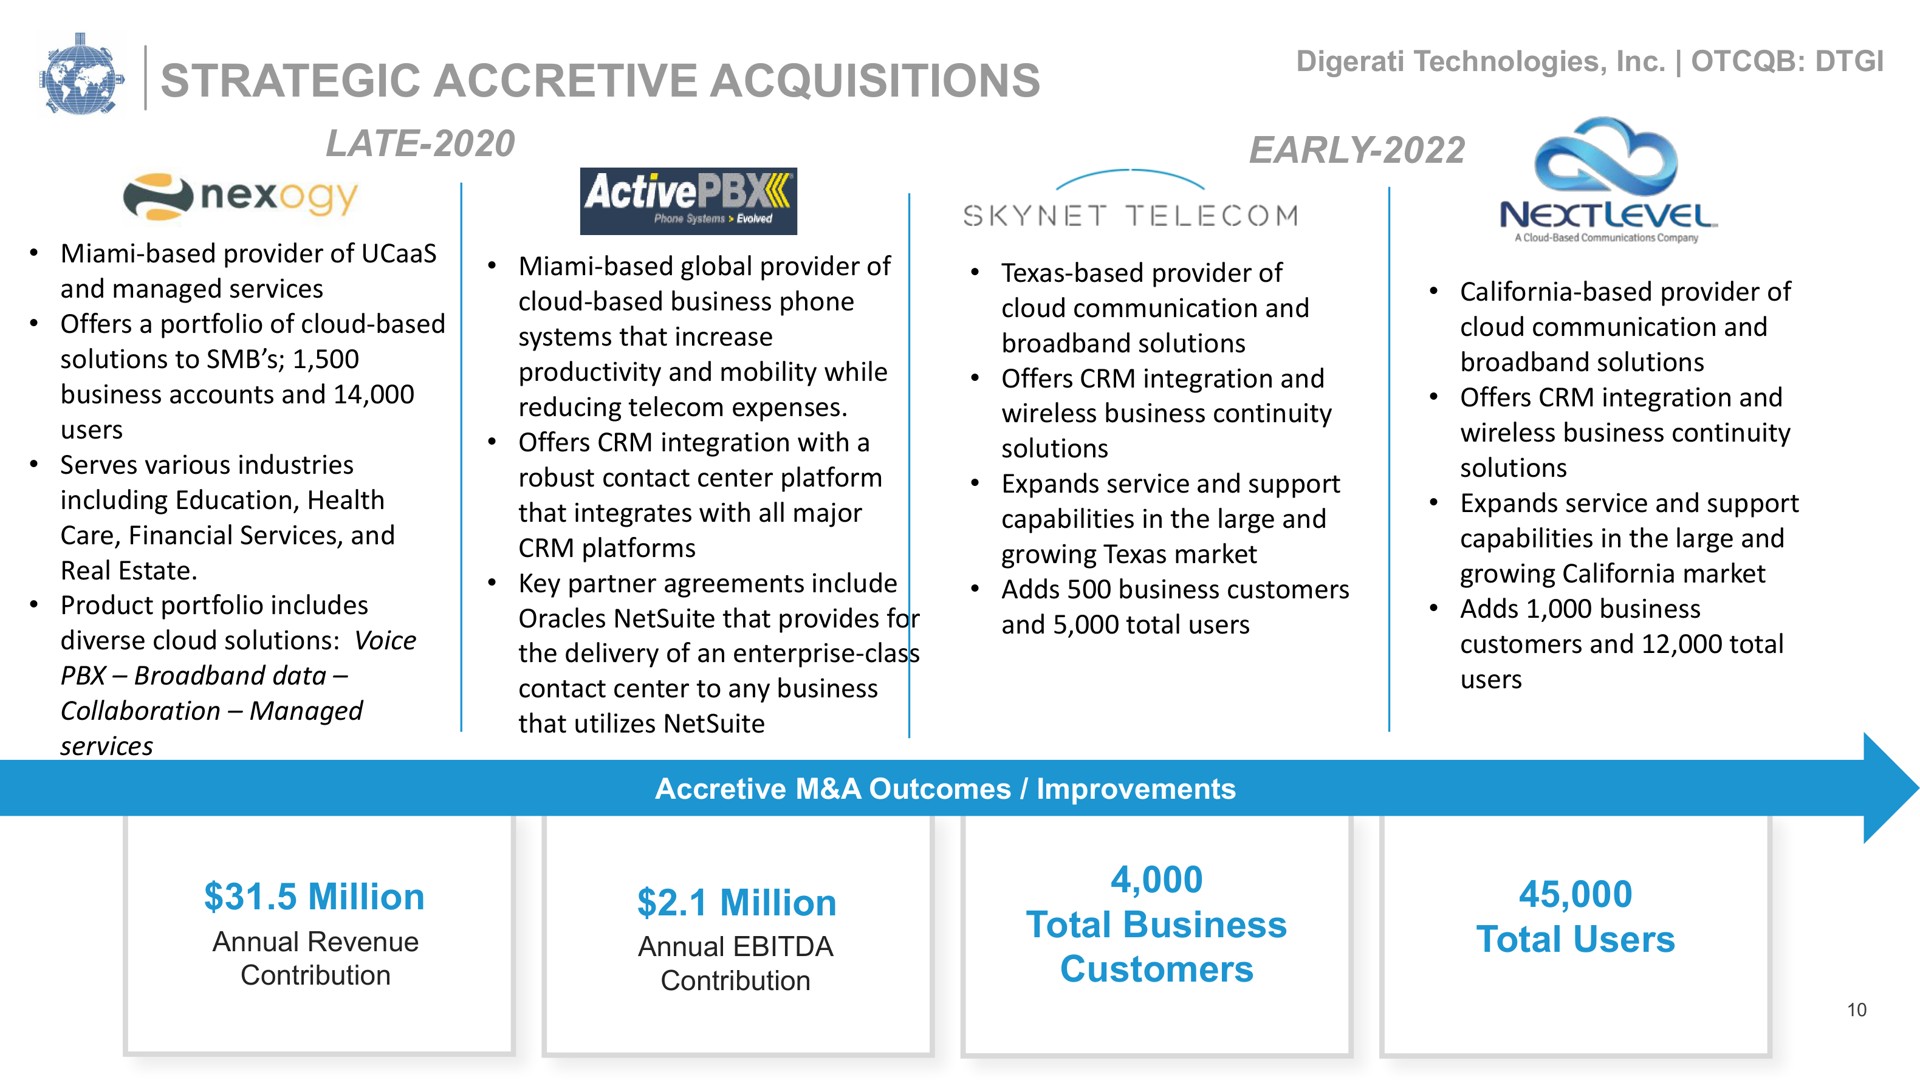 strategic accretive acquisitions late early million million total business customers total users | Digerati